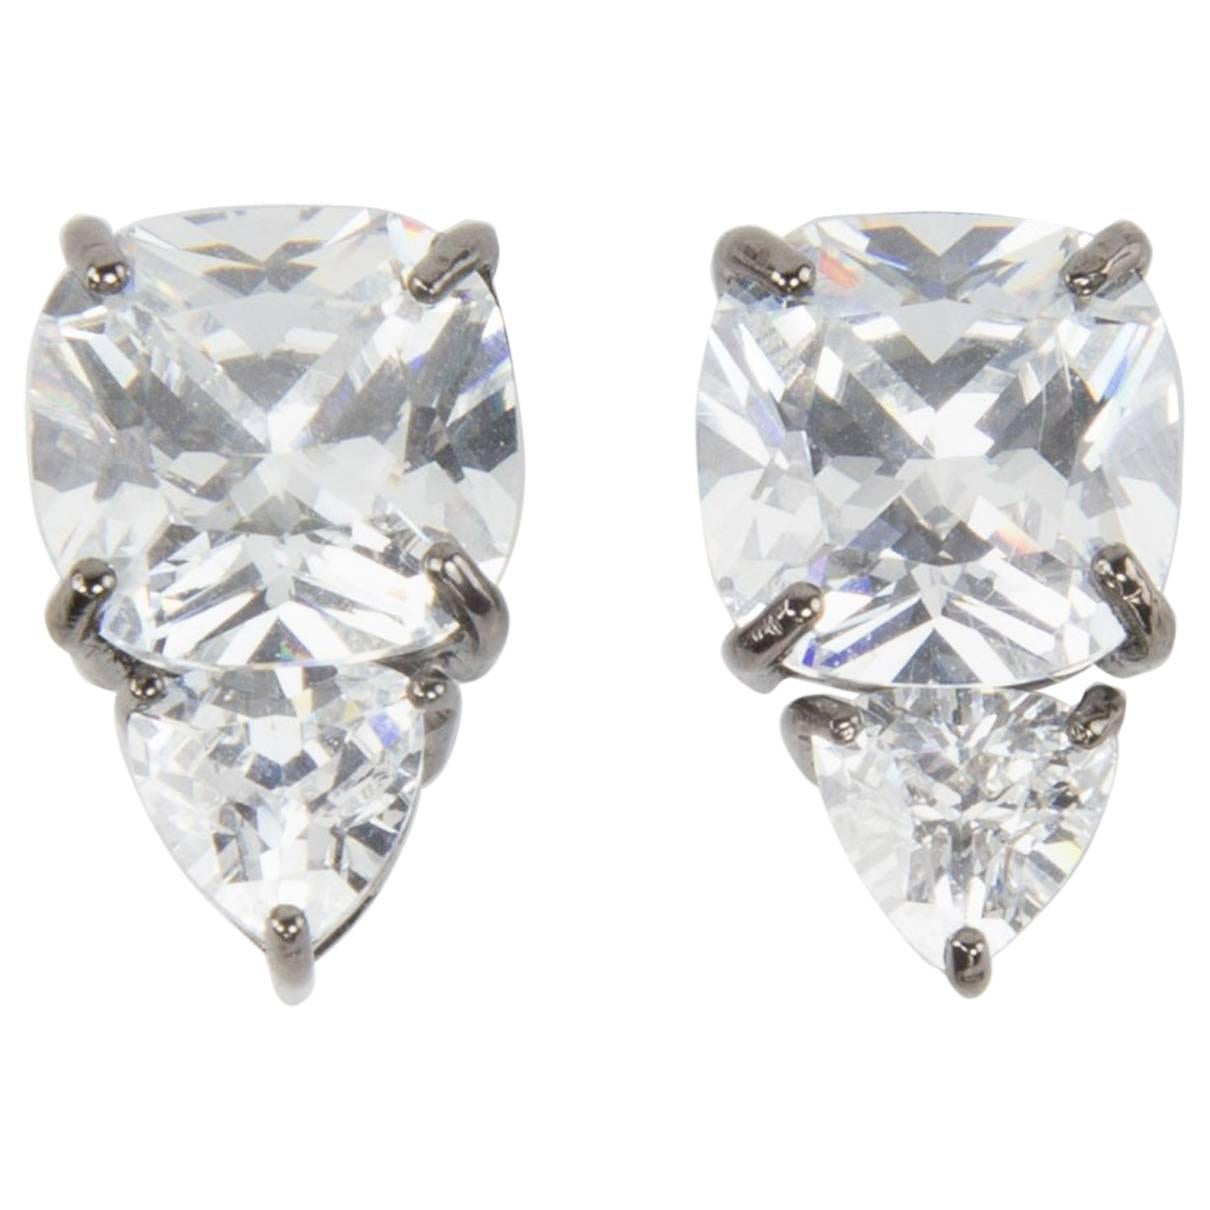 Striking Faux Trillion and Cushion Diamond Stud Statement Clip Earrings